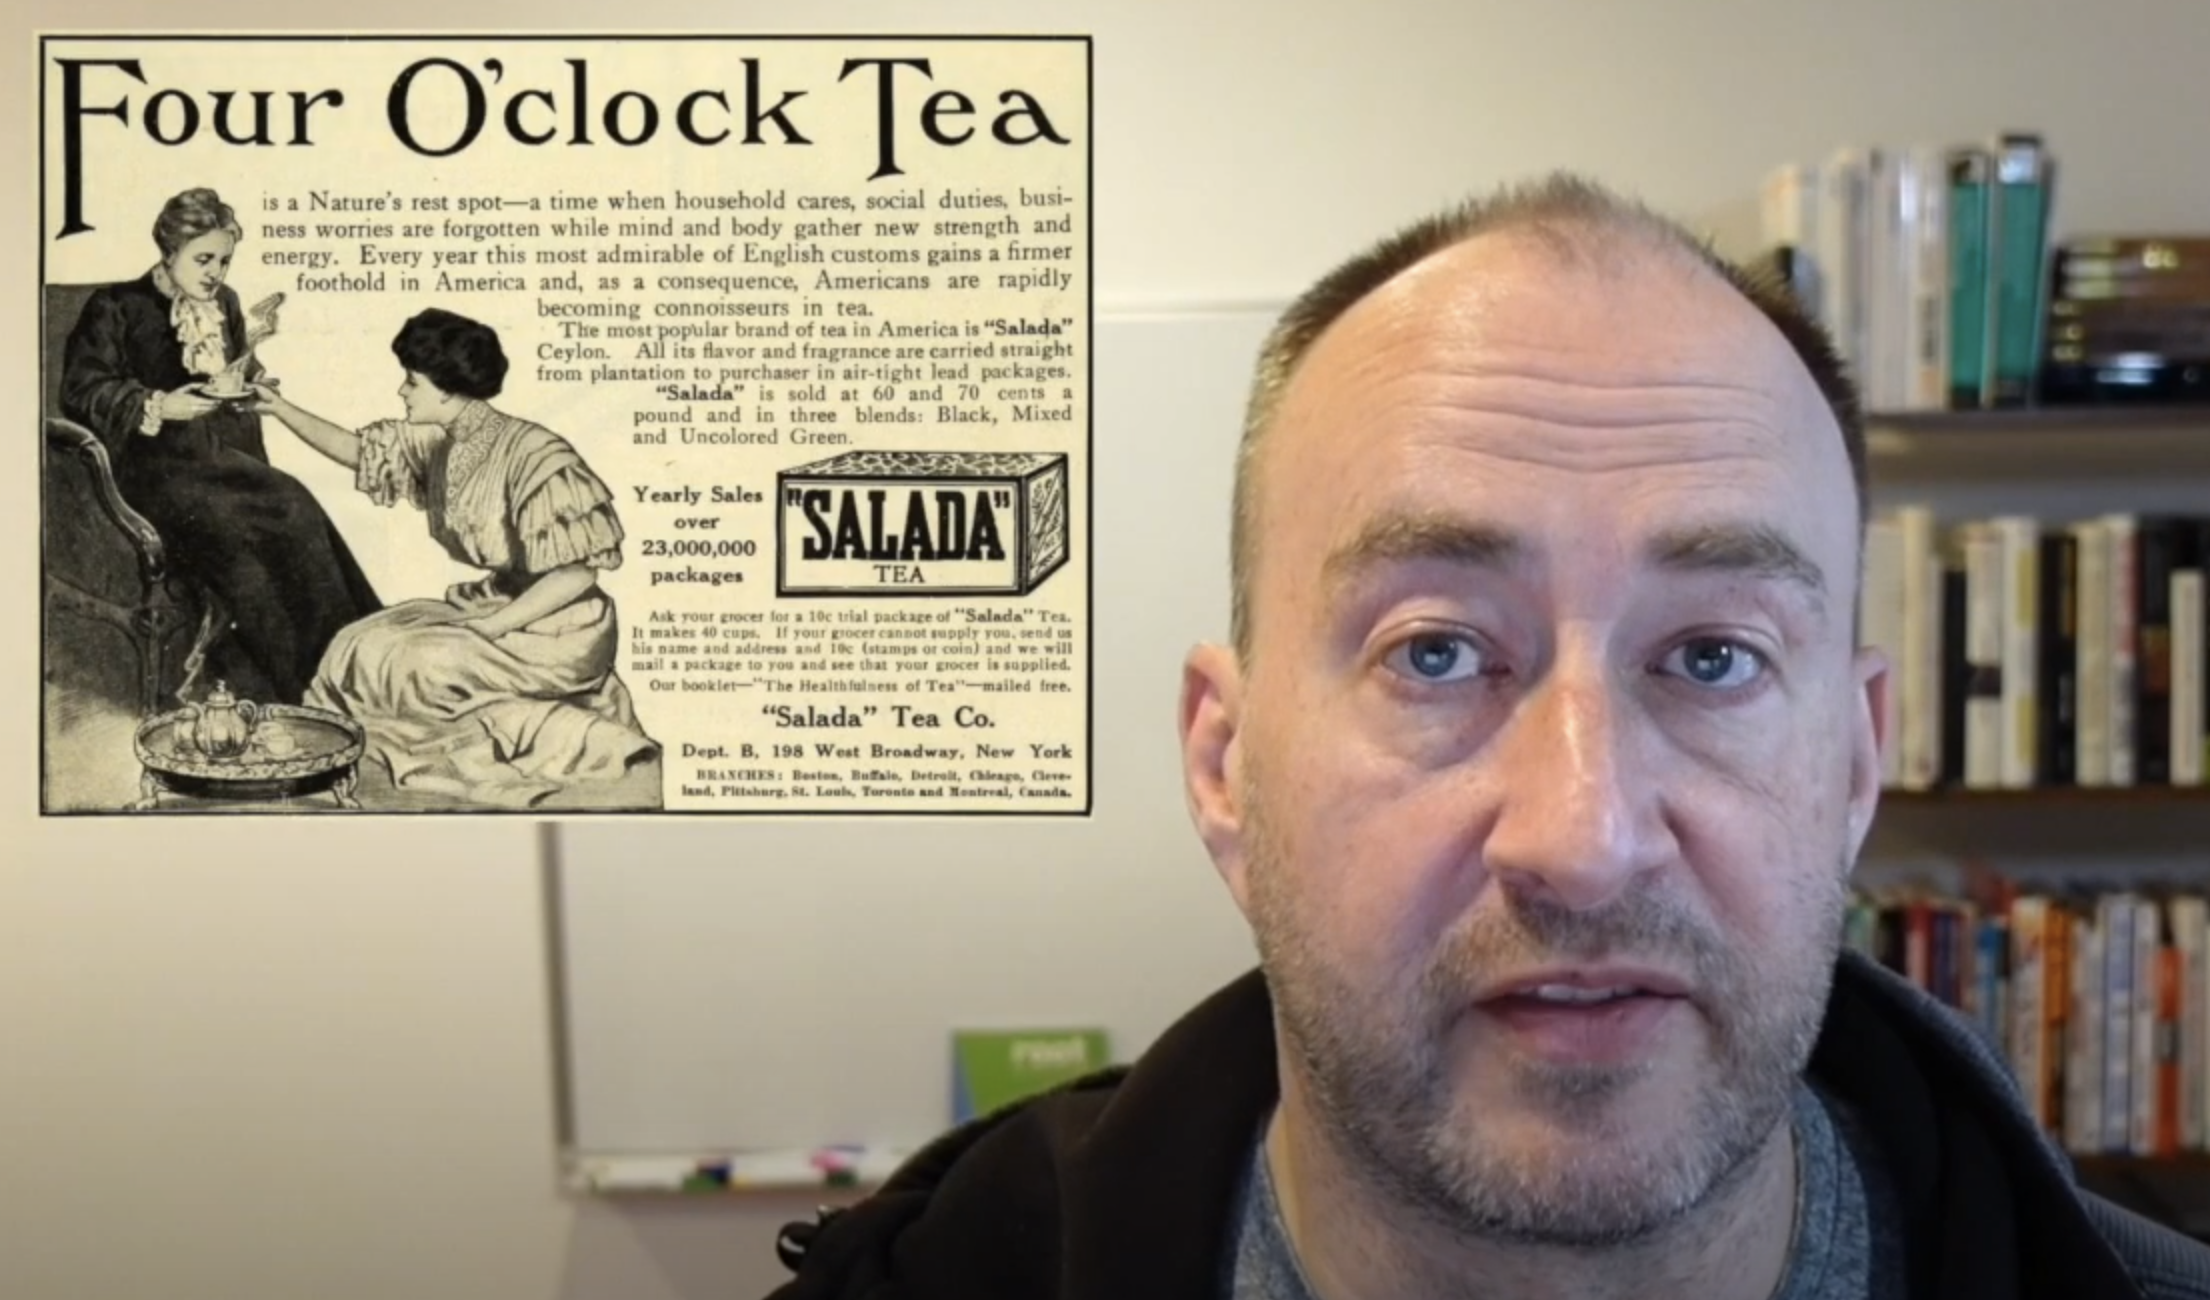 Alistair in front of an old newspaper image advertising tea